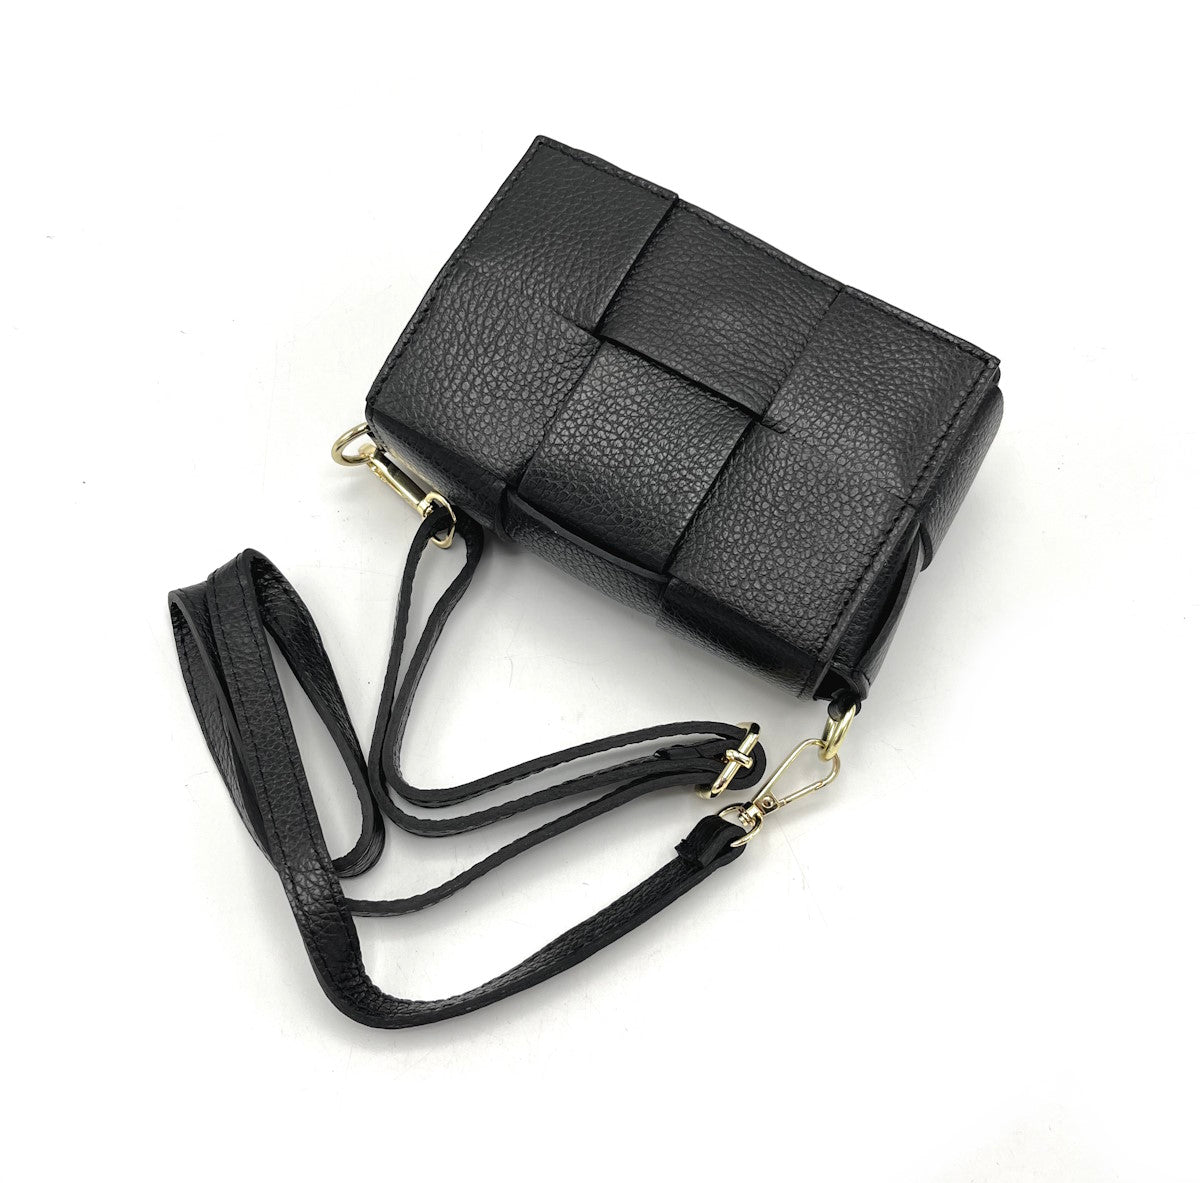 Genuine leather mini shoulder bag, Made in Italy, art. 112451